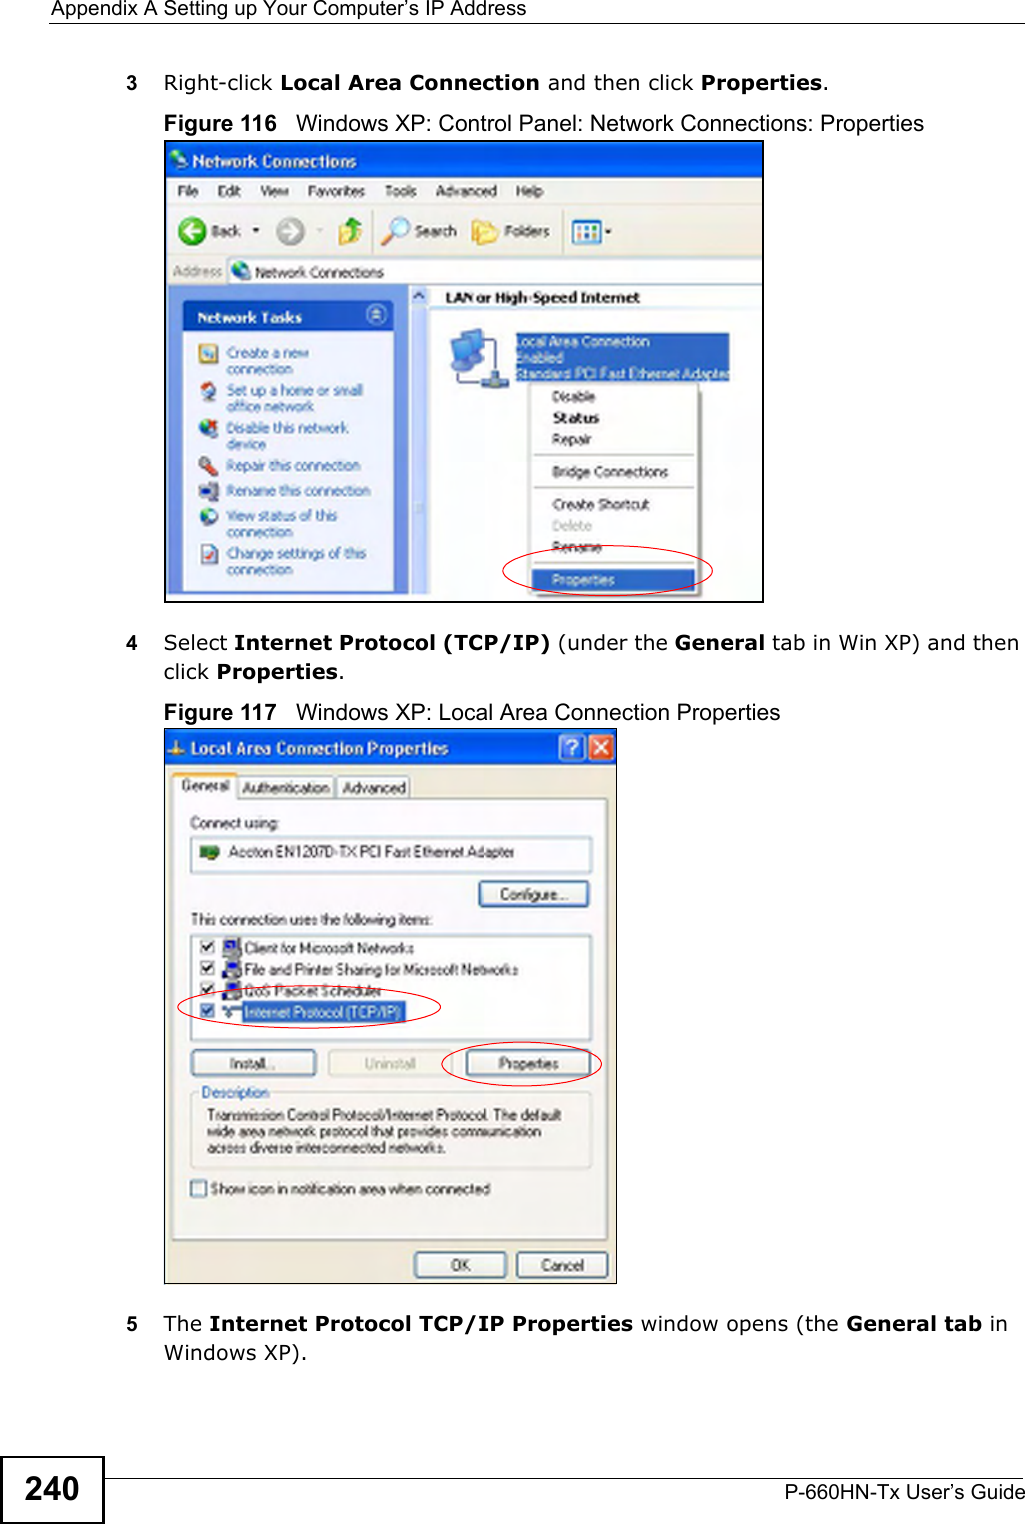 Appendix A Setting up Your Computer’s IP AddressP-660HN-Tx User’s Guide2403Right-click Local Area Connection and then click Properties.Figure 116   Windows XP: Control Panel: Network Connections: Properties4Select Internet Protocol (TCP/IP) (under the General tab in Win XP) and then click Properties.Figure 117   Windows XP: Local Area Connection Properties5The Internet Protocol TCP/IP Properties window opens (the General tab in Windows XP).